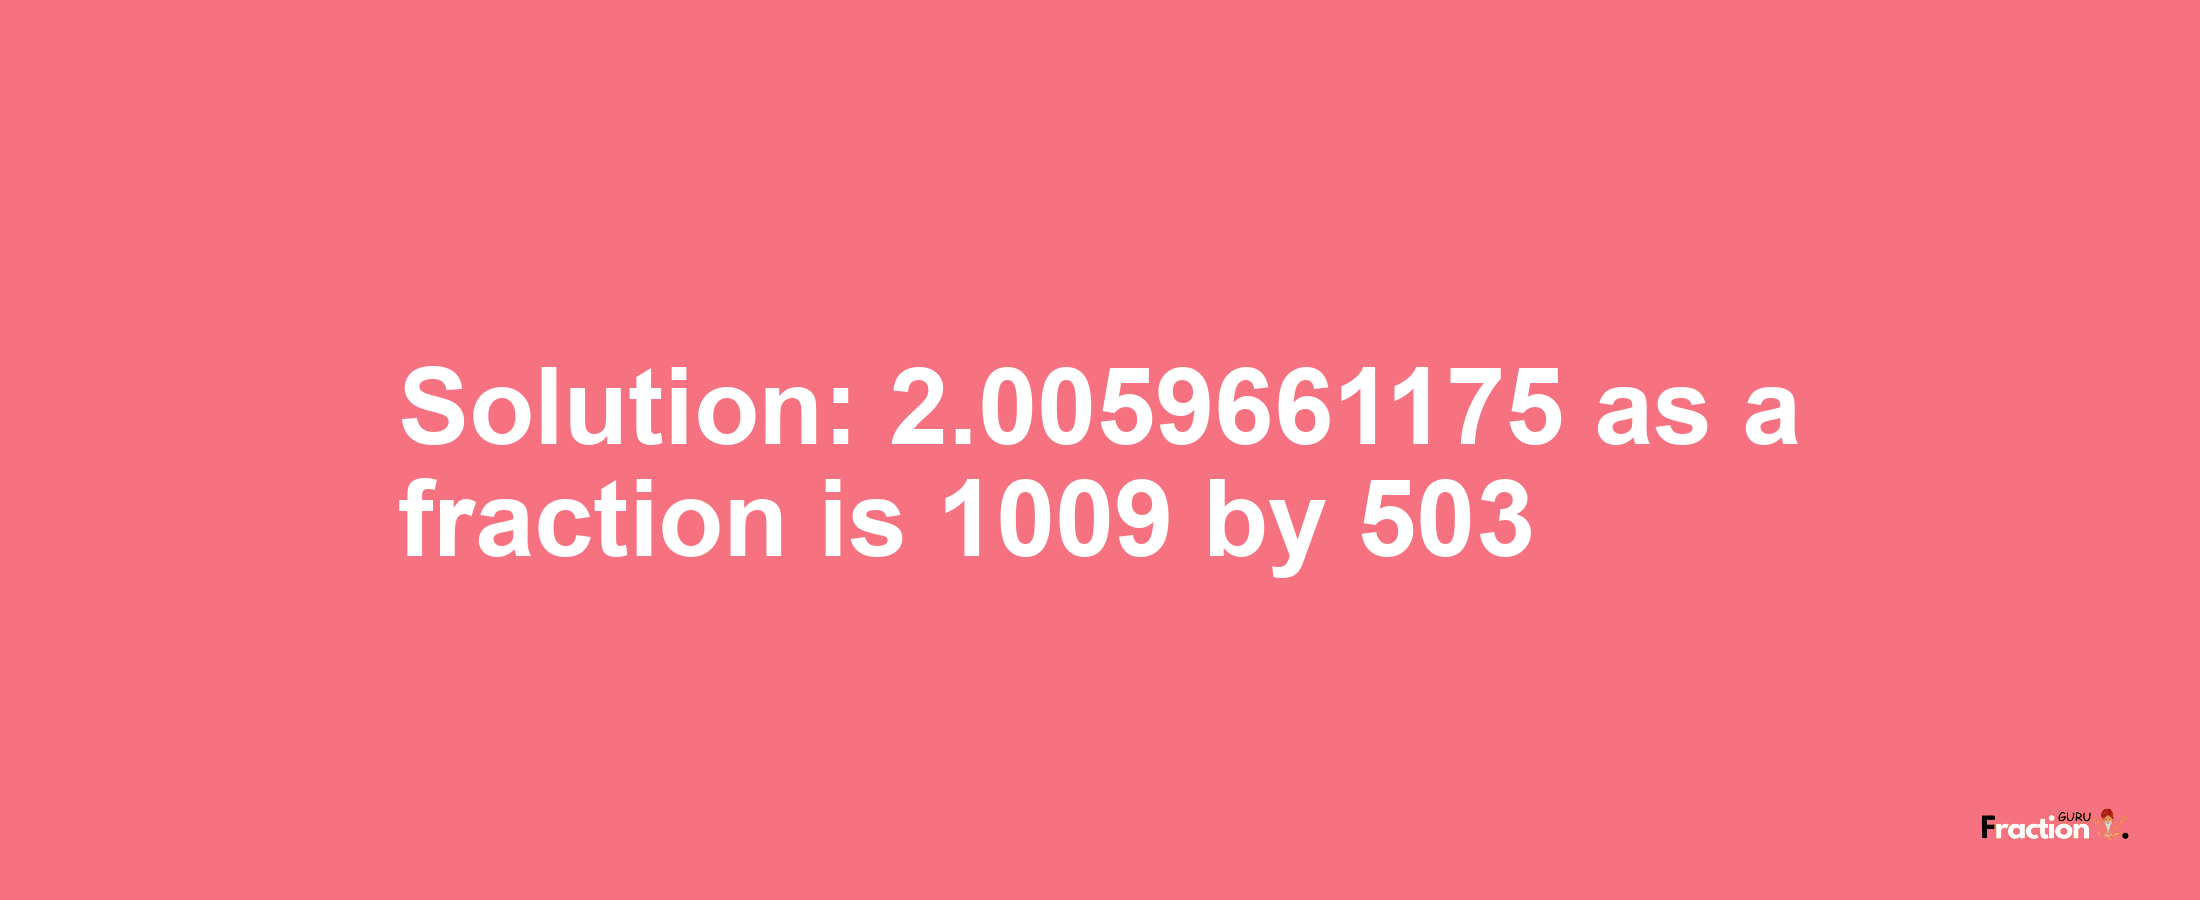 Solution:2.0059661175 as a fraction is 1009/503